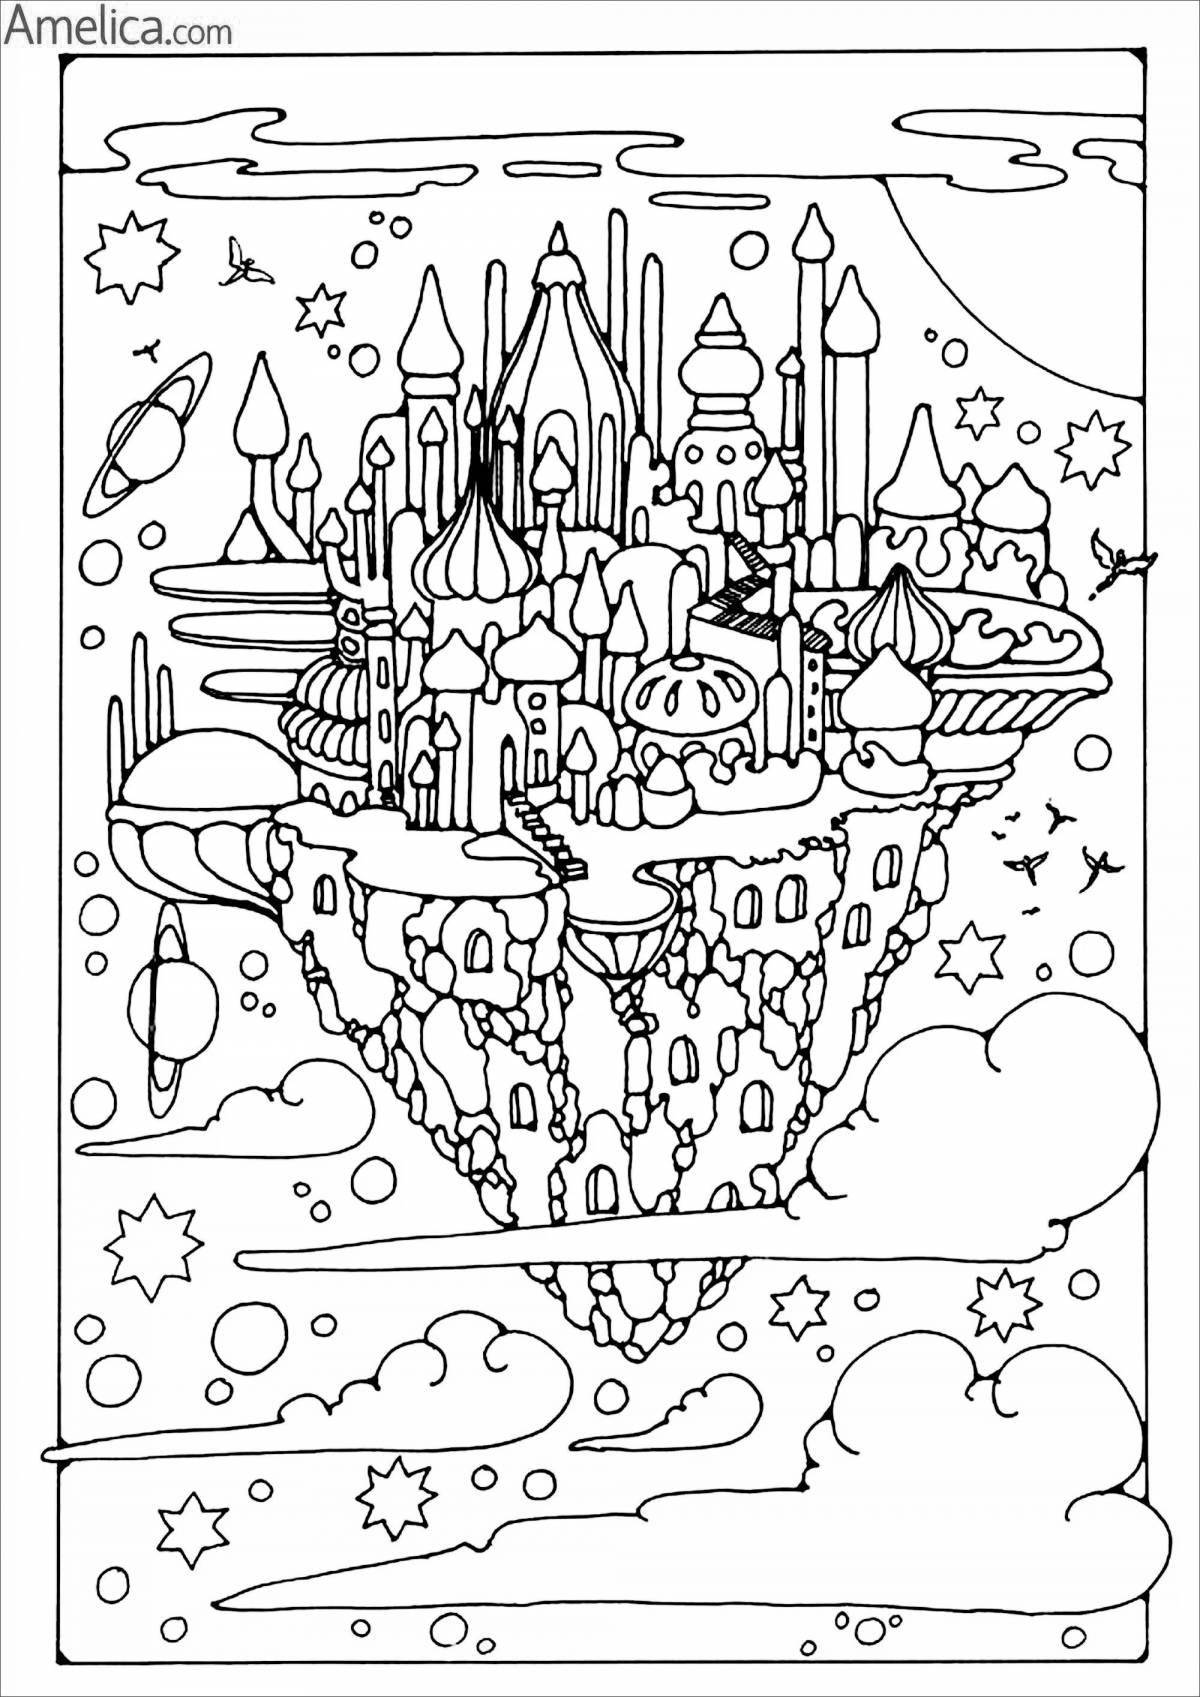 Awesome magical world coloring page